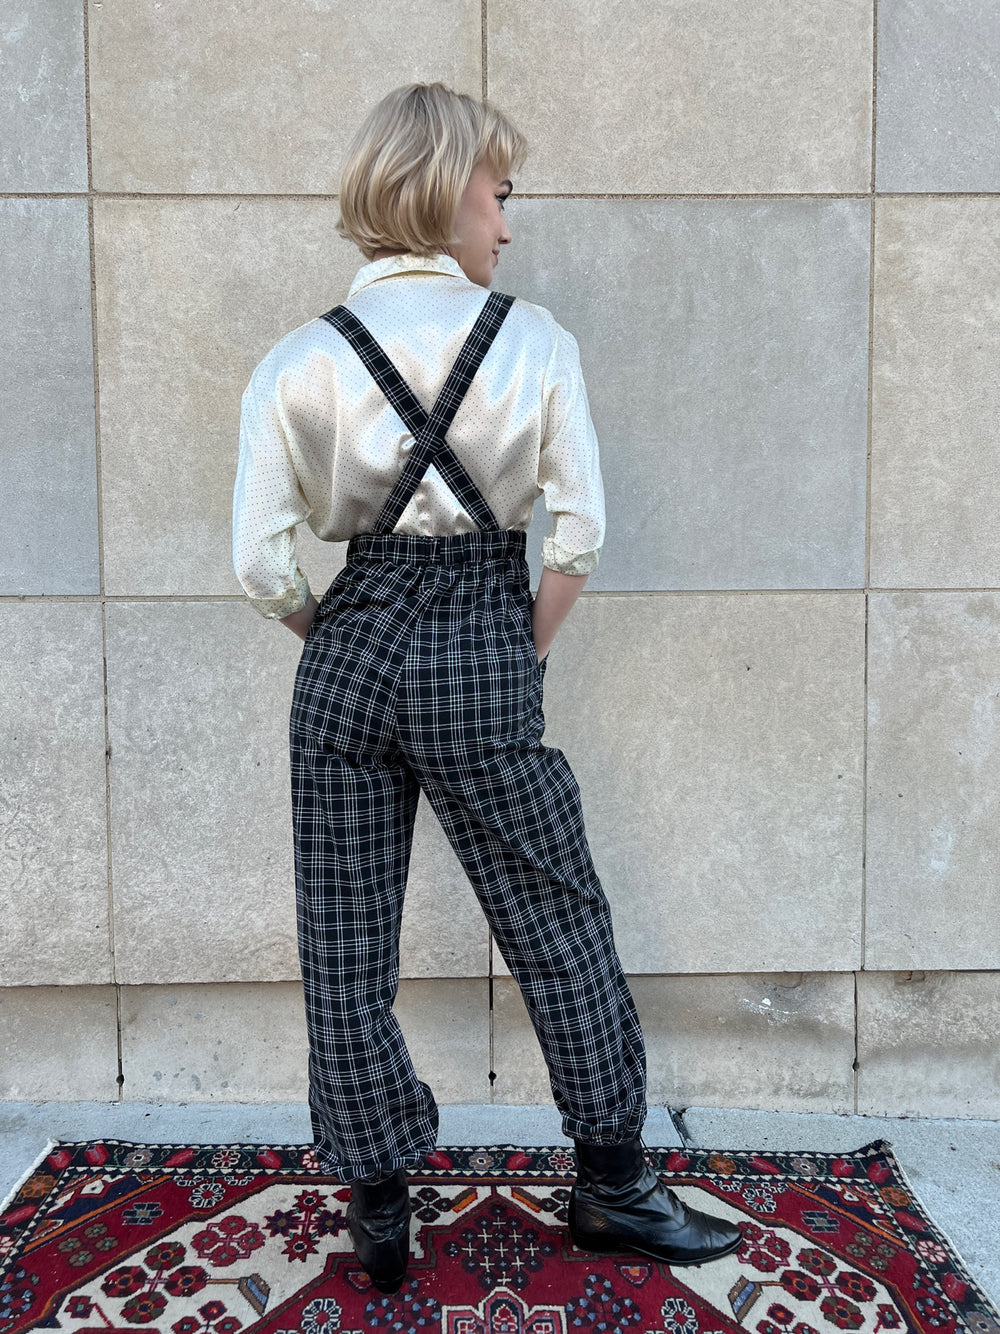 80s Black and White Plaid Pants with Suspenders